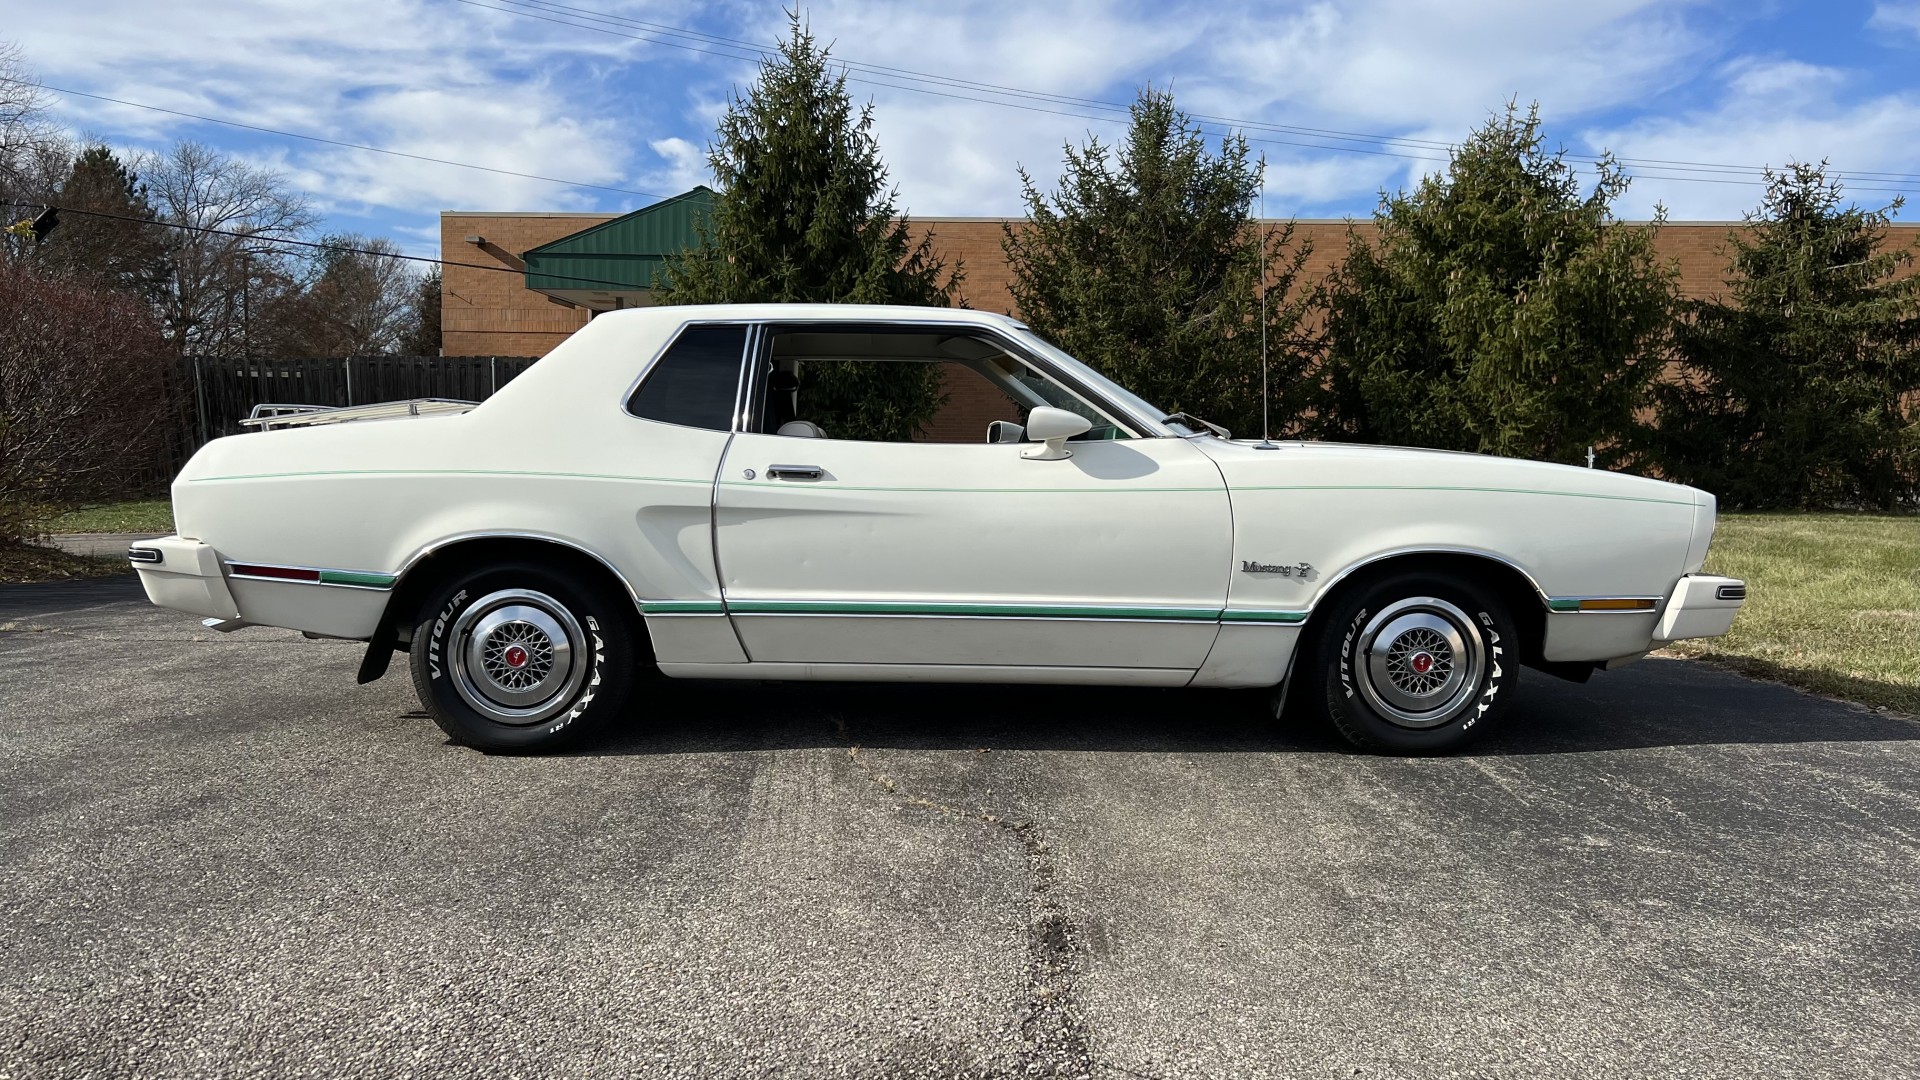 1977 Ford Mustang, 4 Speed, Original Paint, SOLD!